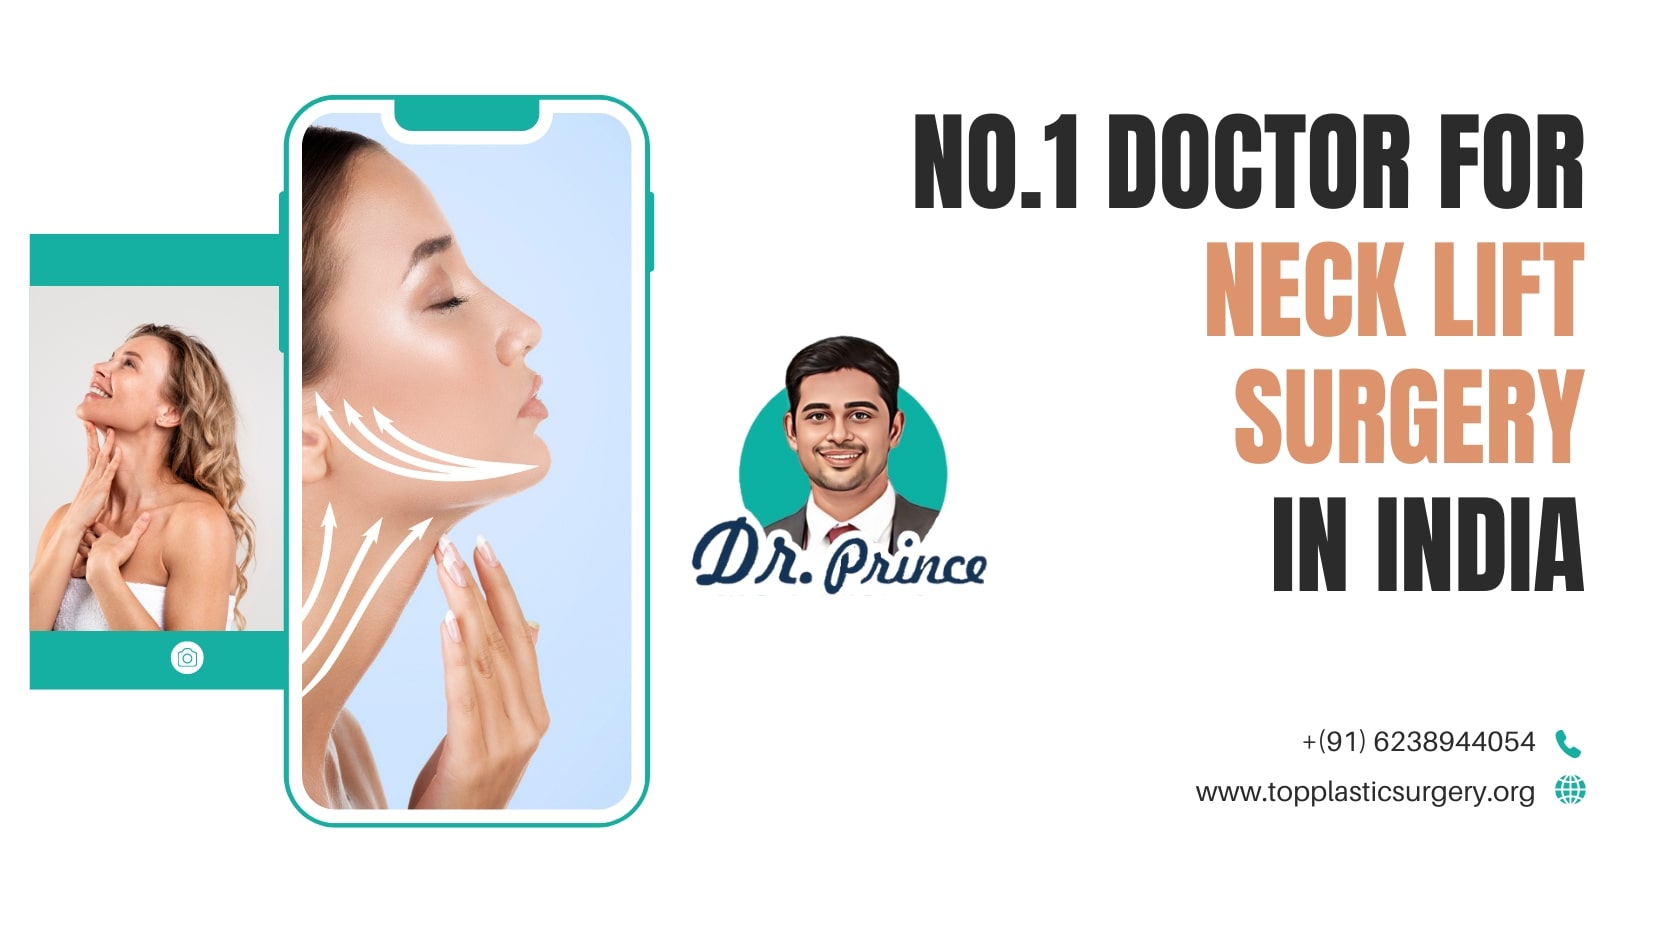 No. 1 Doctor for Neck Lift Surgery in India - Dr. Prince